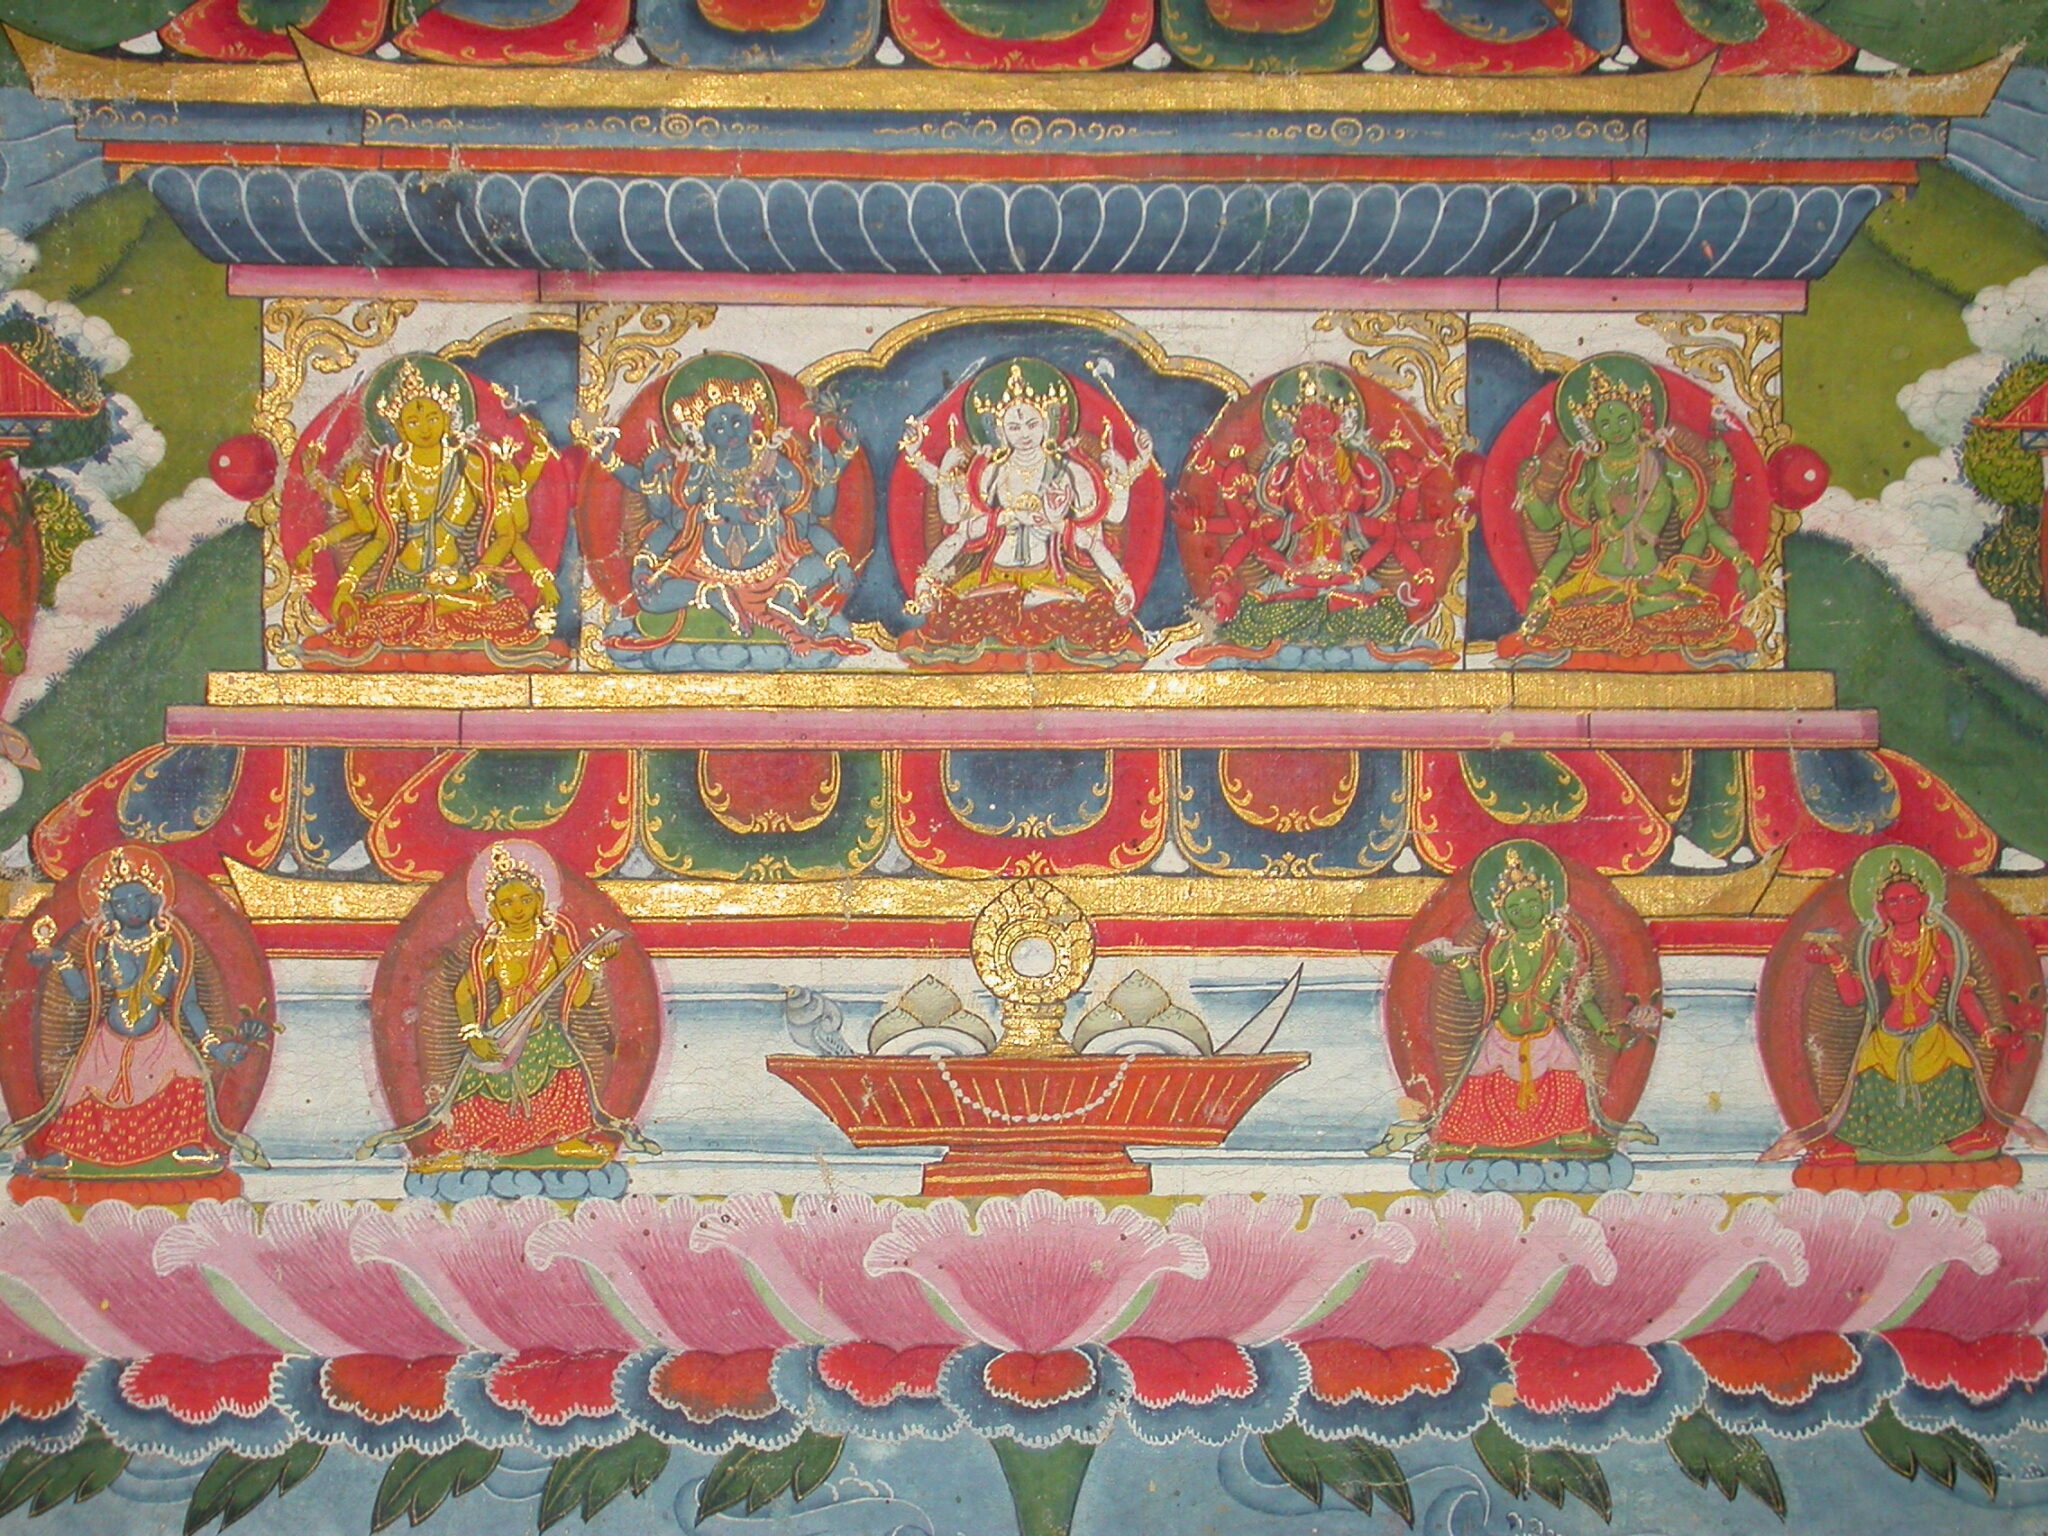 Detail of plinth supporting lotus pedestal featuring nine deity portraits and dish containing gold and white implements